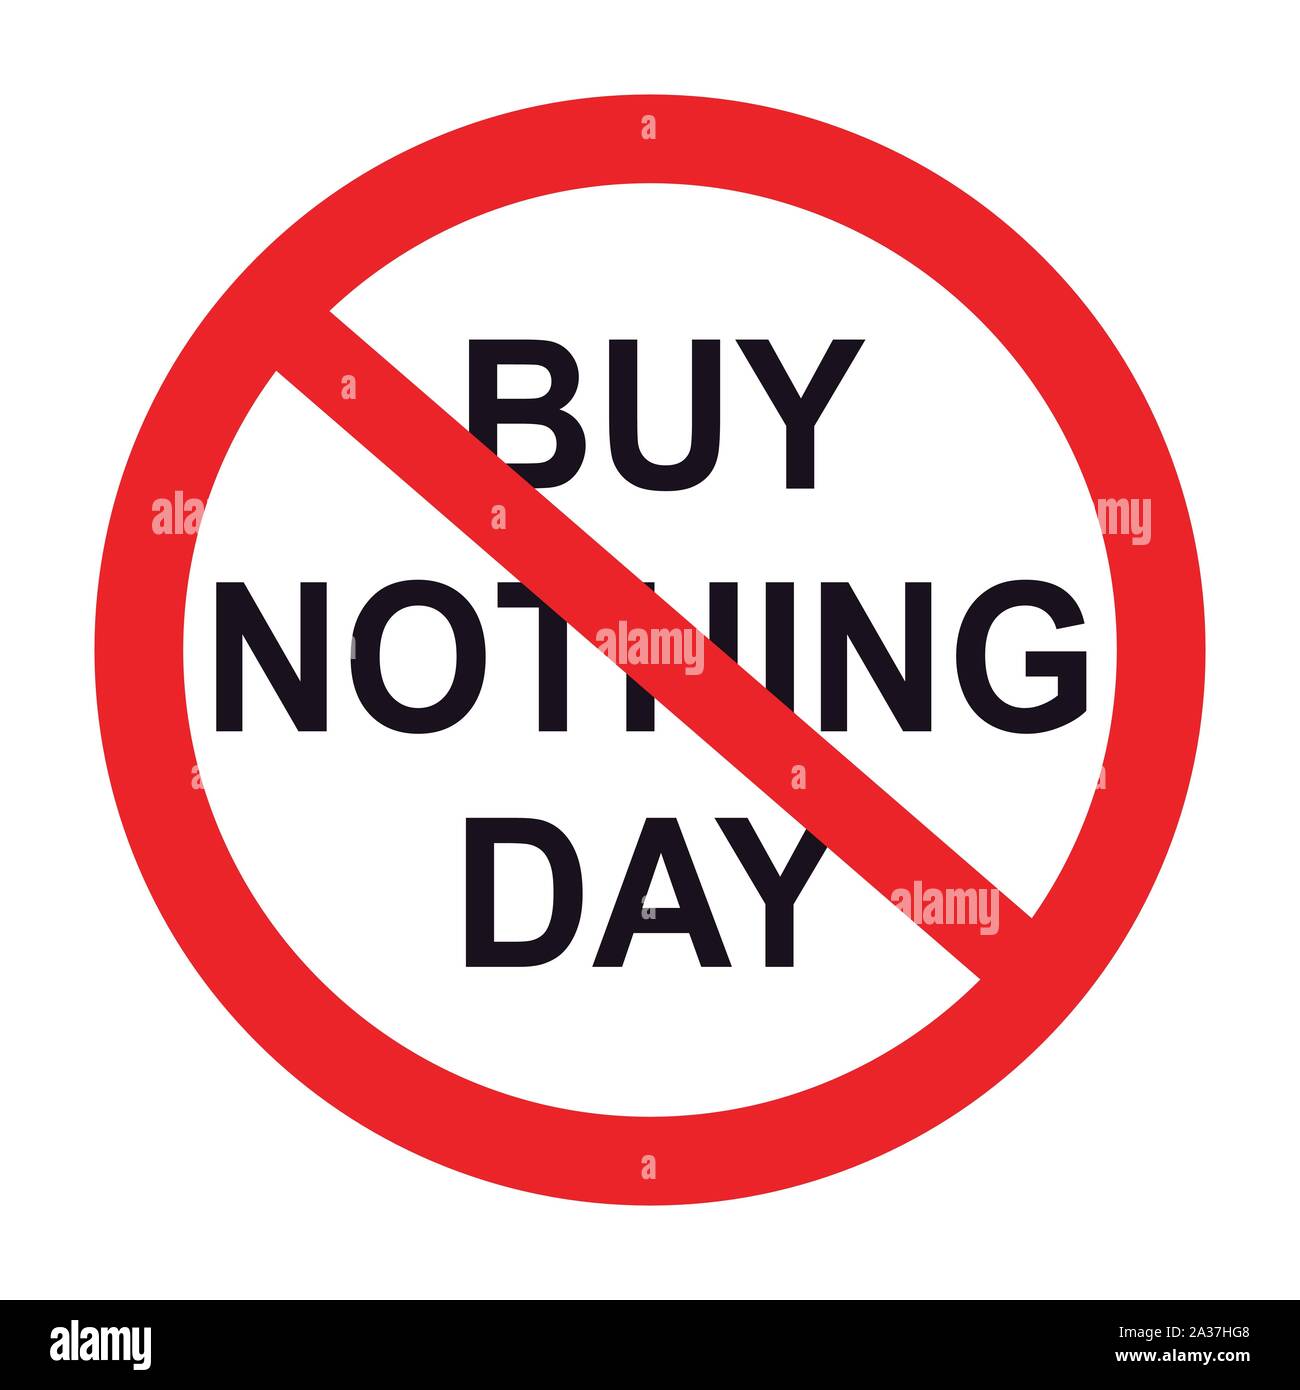 Buy Nothing Day text and sign stop. Isolated vector illustration on white background. Stock Vector